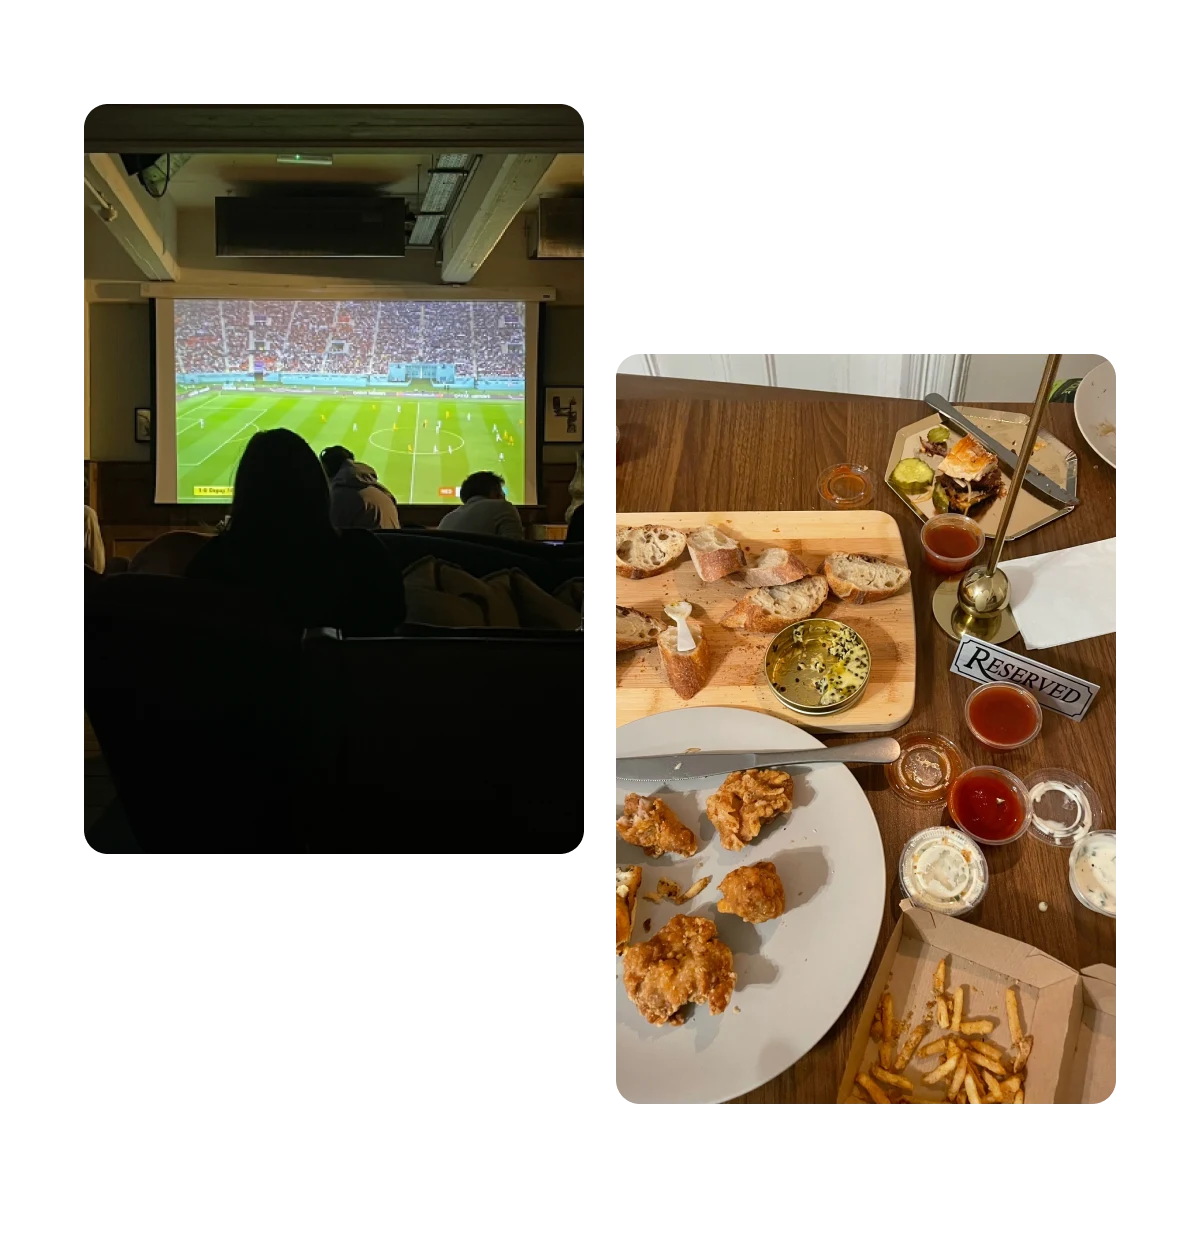 Two pins, fans watching football game, spread of junk food